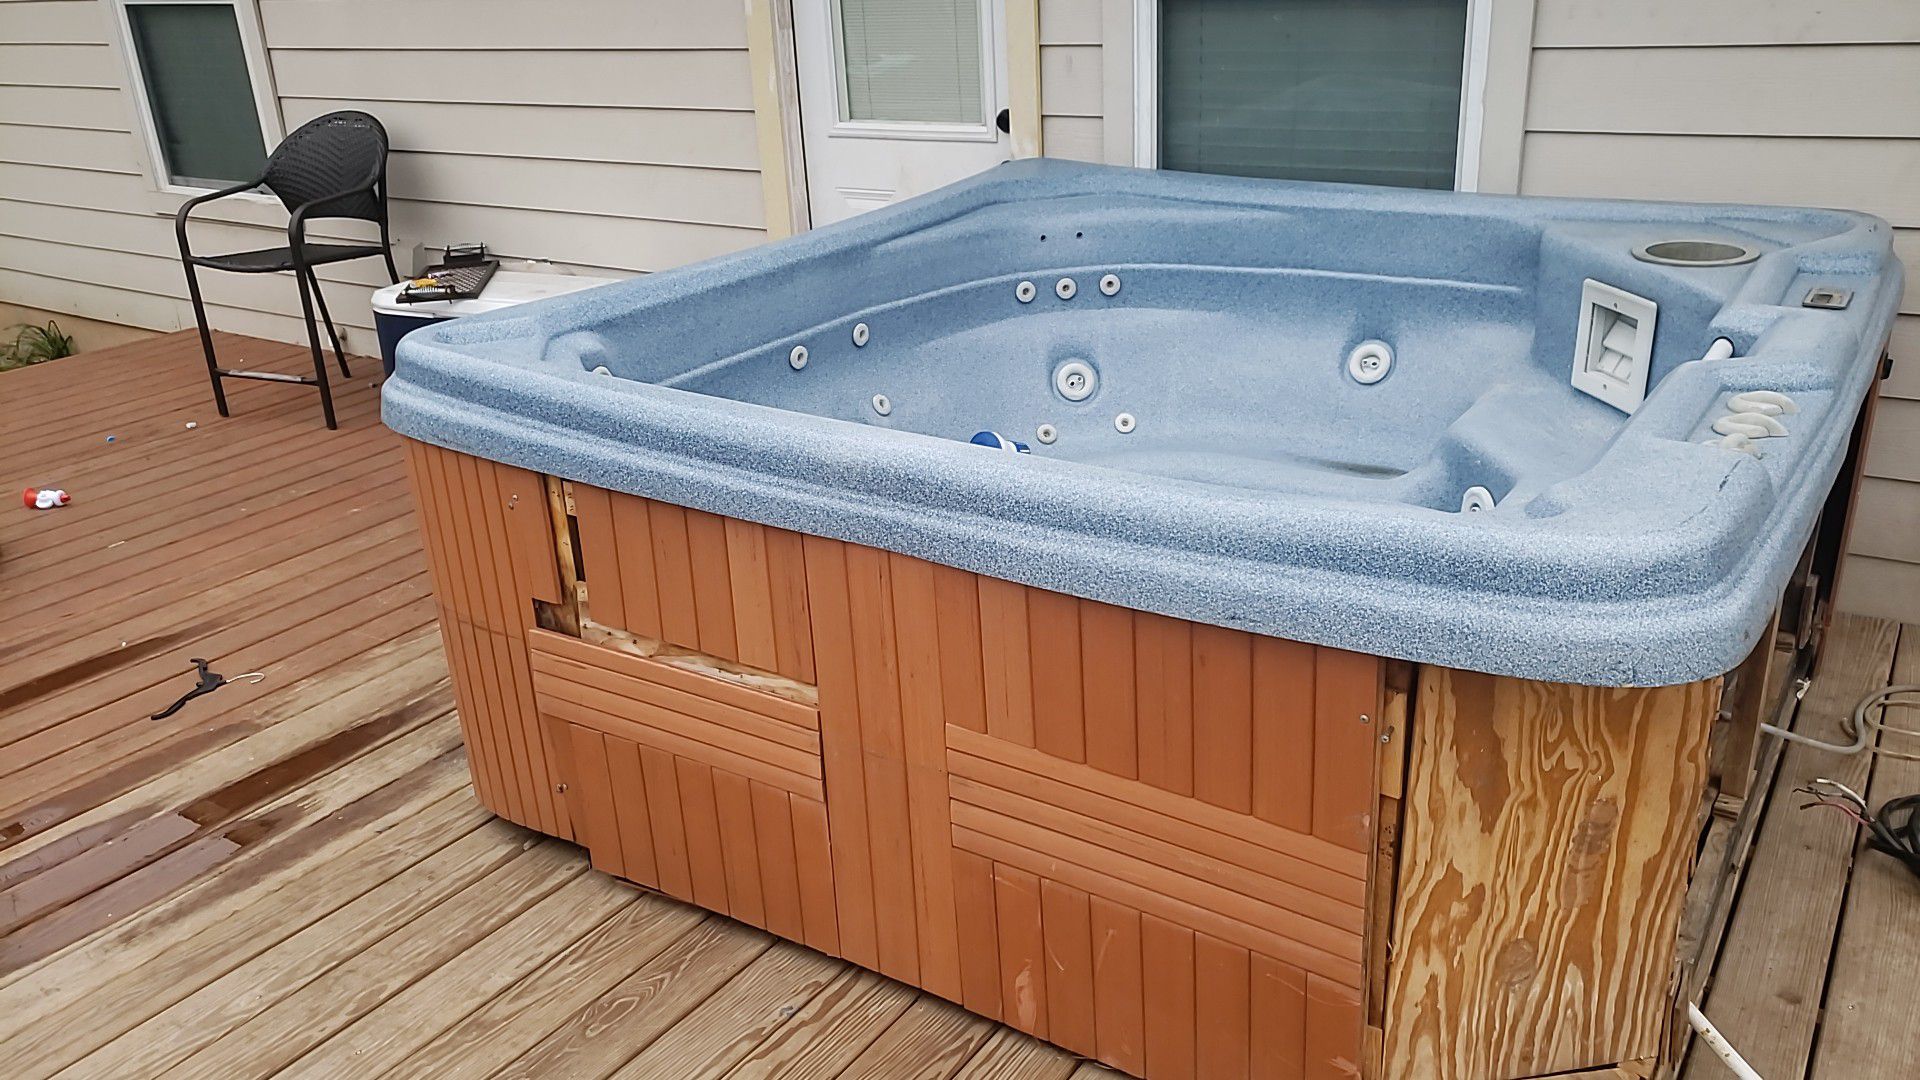 Hot tub for sale Must pick up